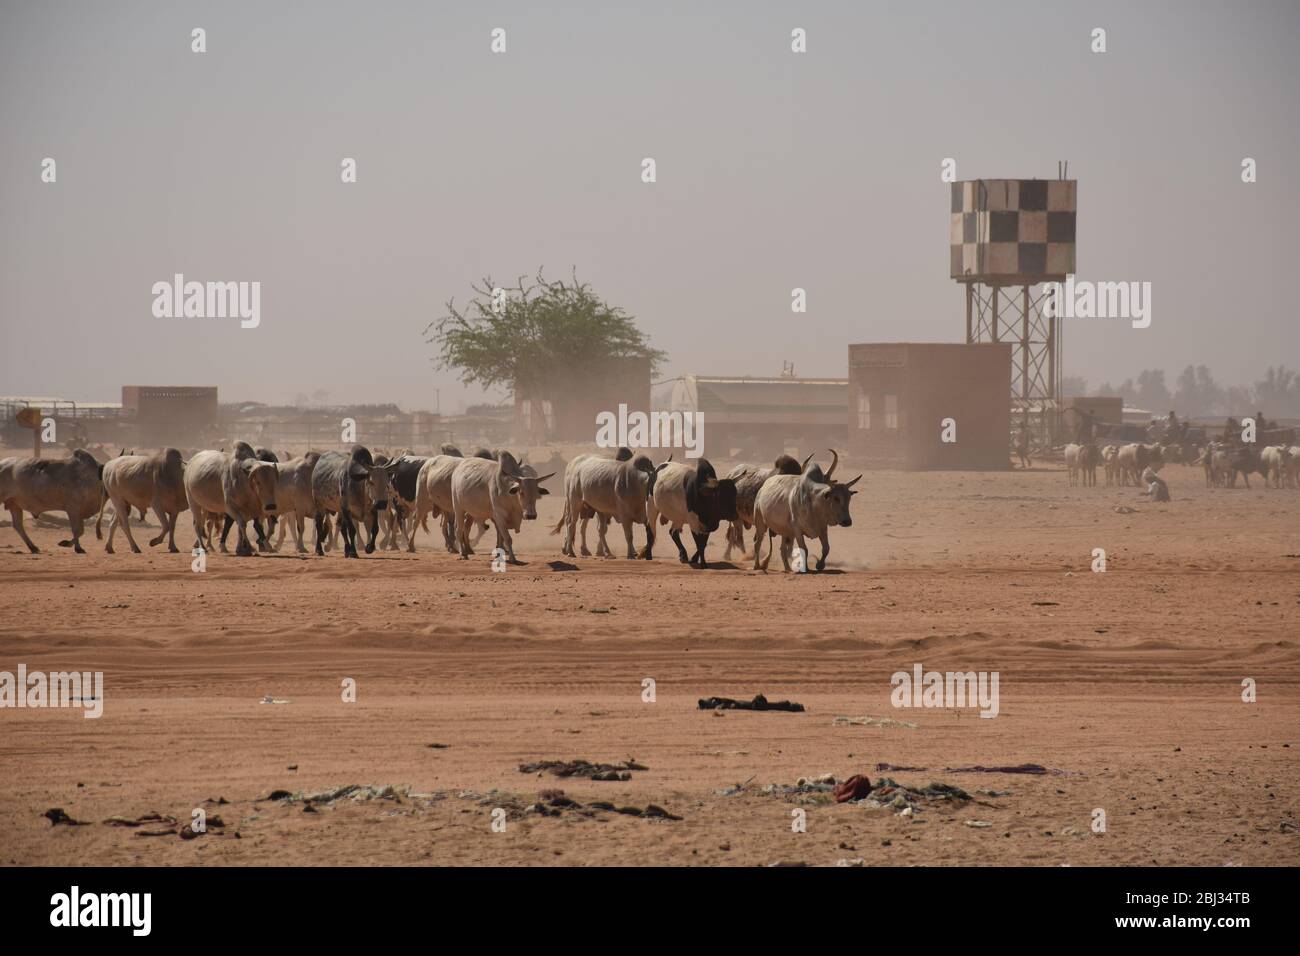 Cows off to Market in Sudan. Stock Photo